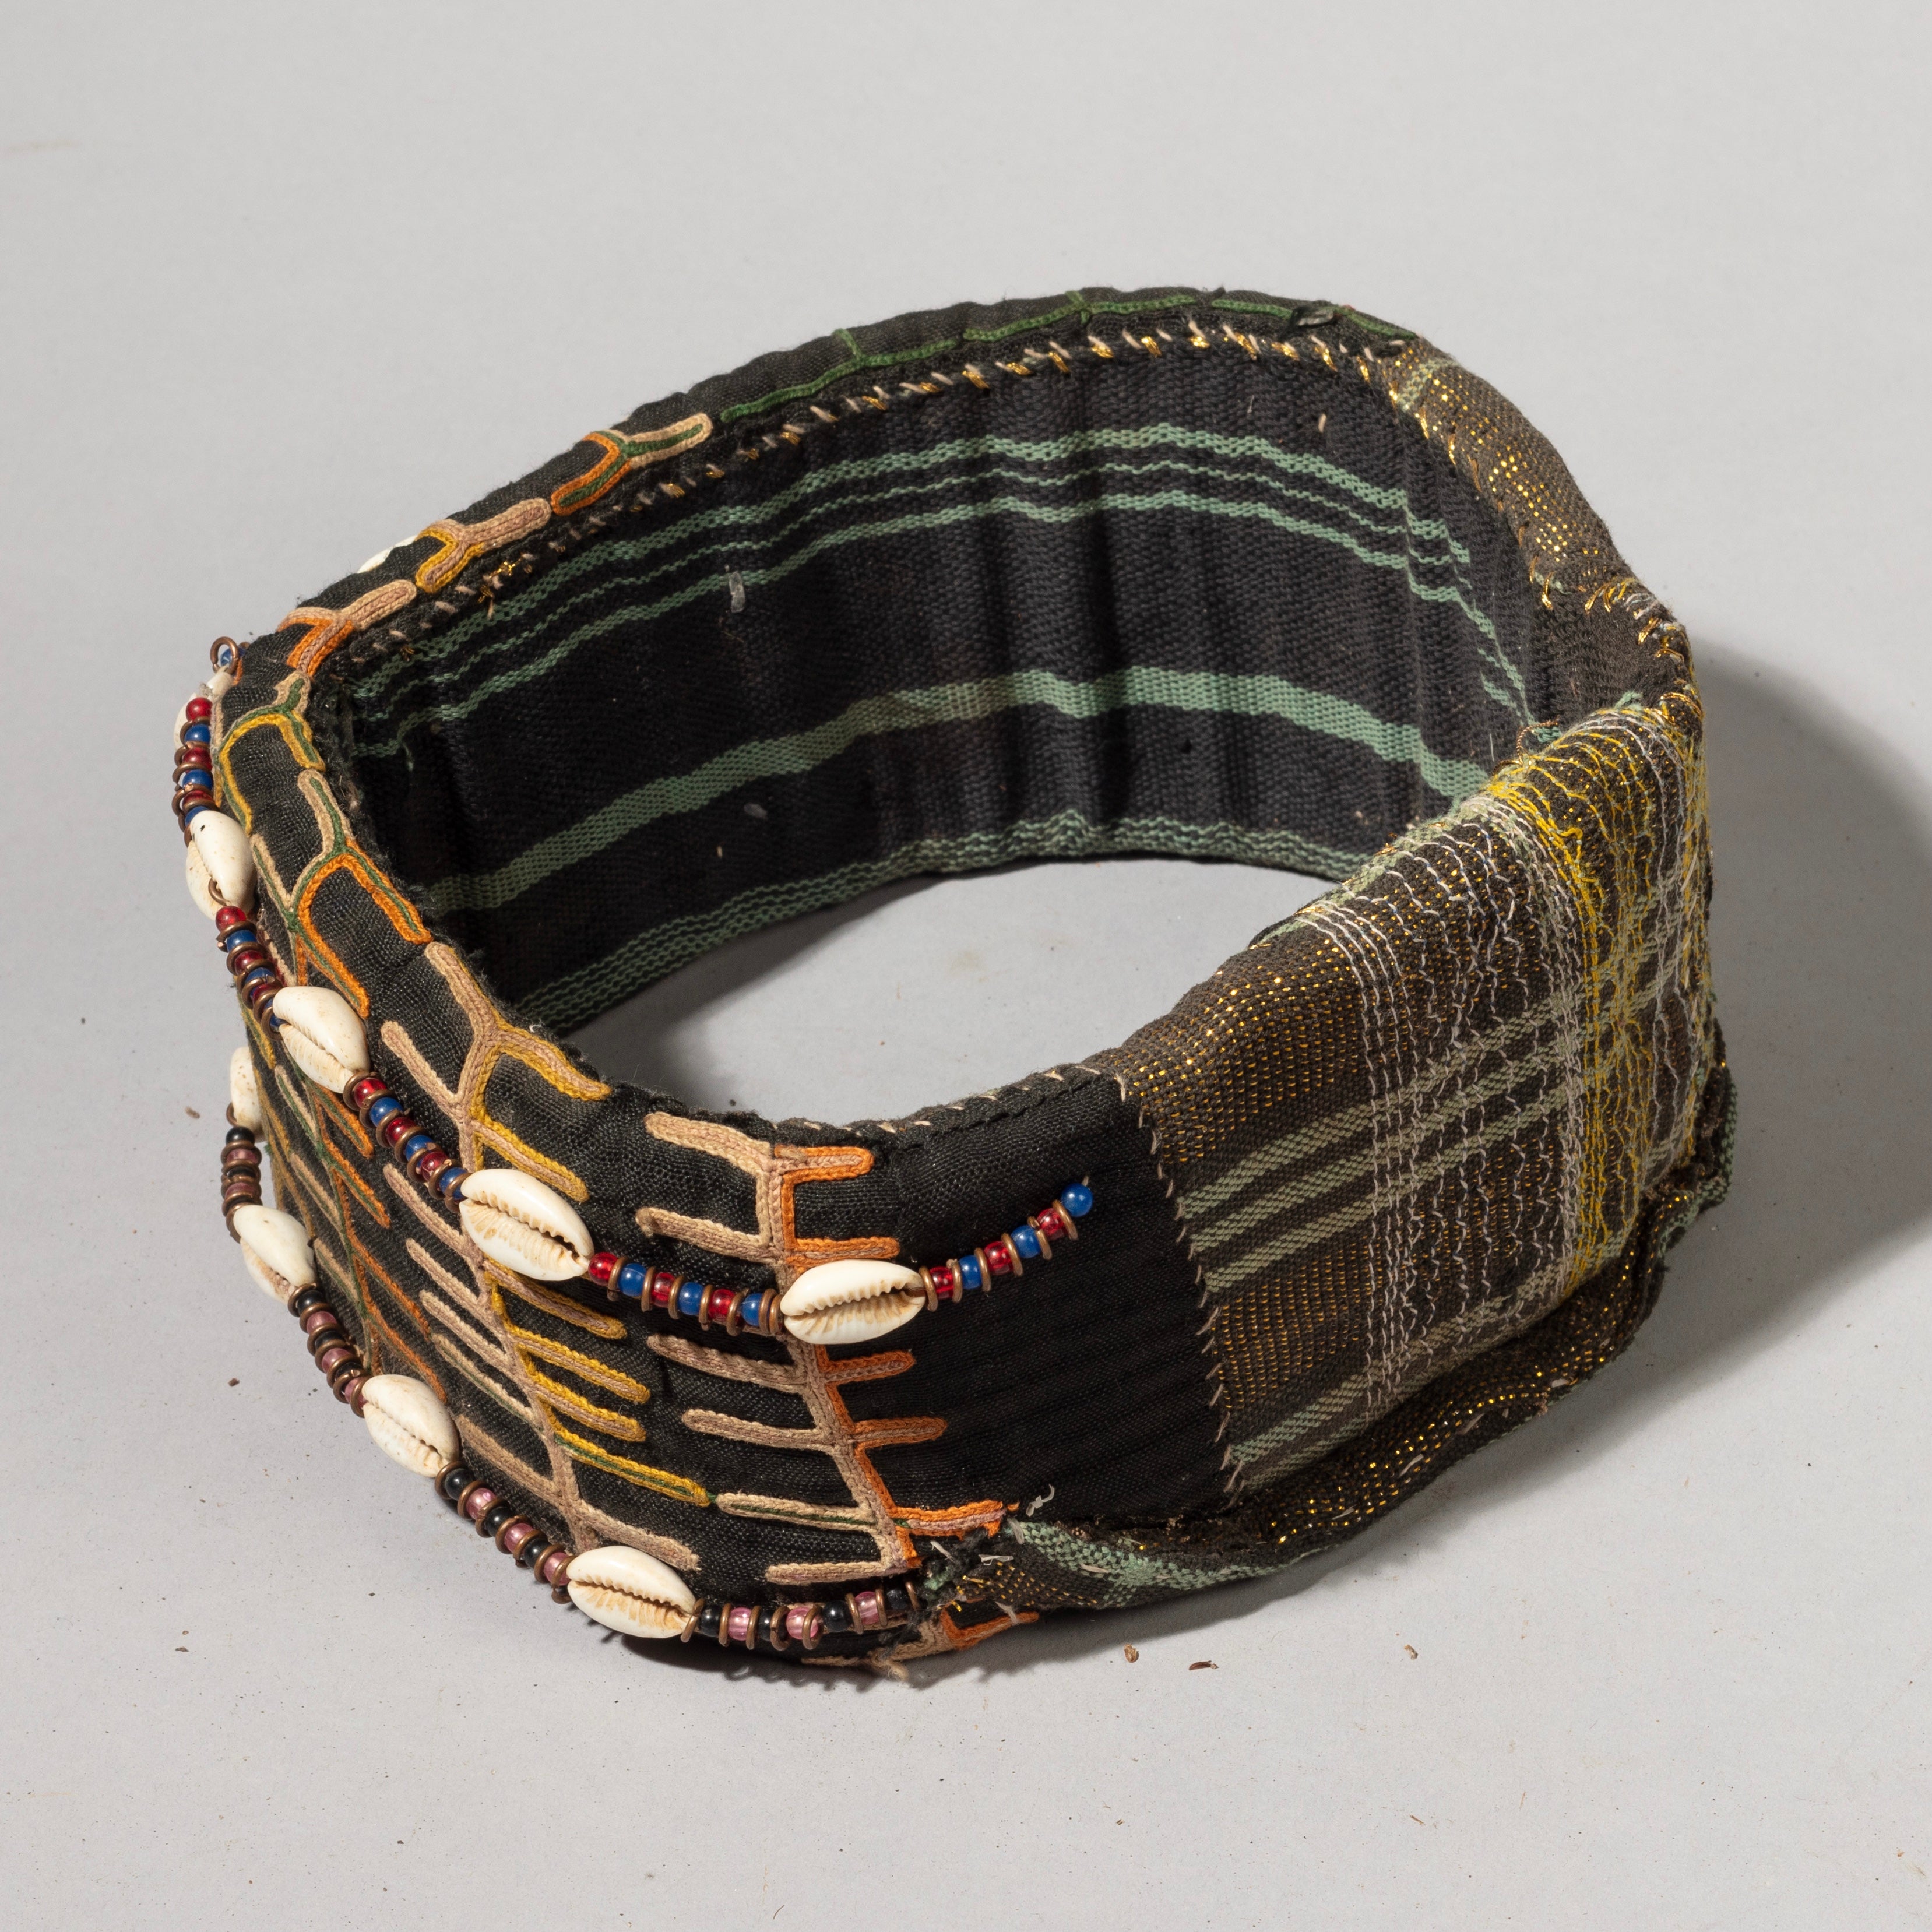 A HAND EMBROIDERED HAT FROM WAADABE TRIBE OF THE SAHARA, NIGER ( No 1196)